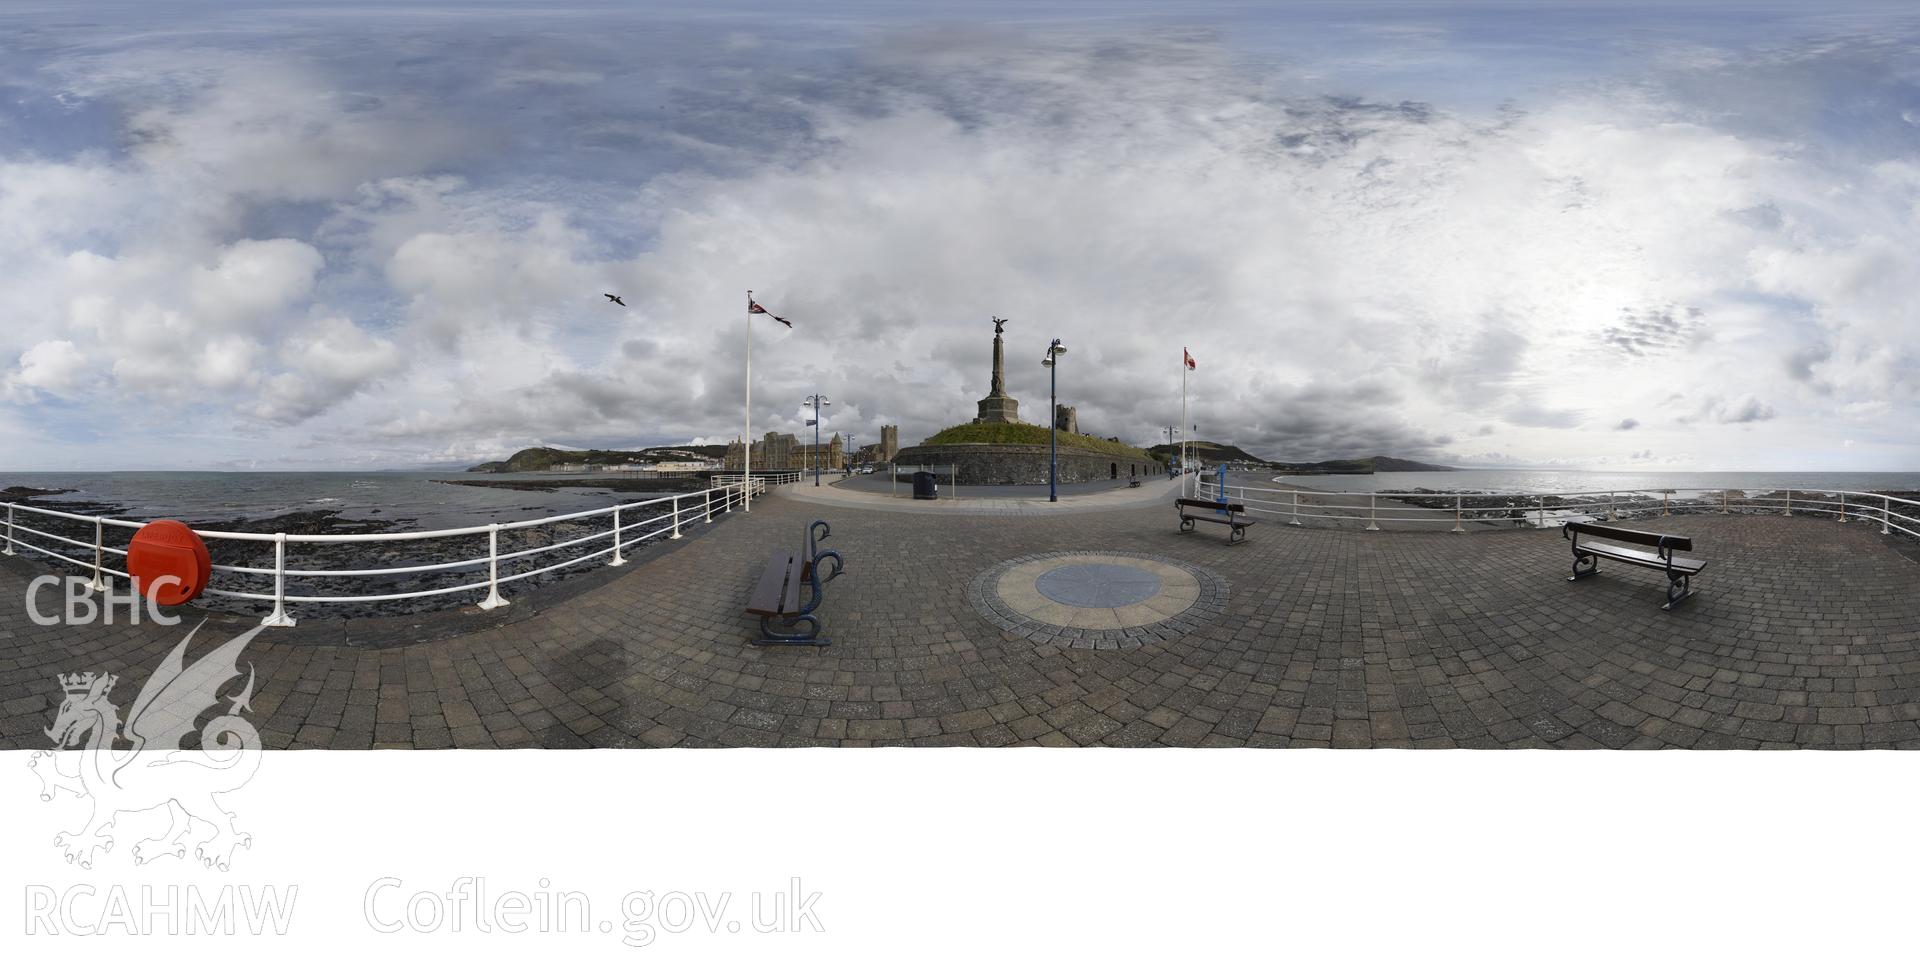 Reduced resolution Tiff of stitched images from Promenade next to the War Memorial, Aberystwyth produced by Susan Fielding and Rita Singer, 2018. Produced through European Travellers to Wales project.